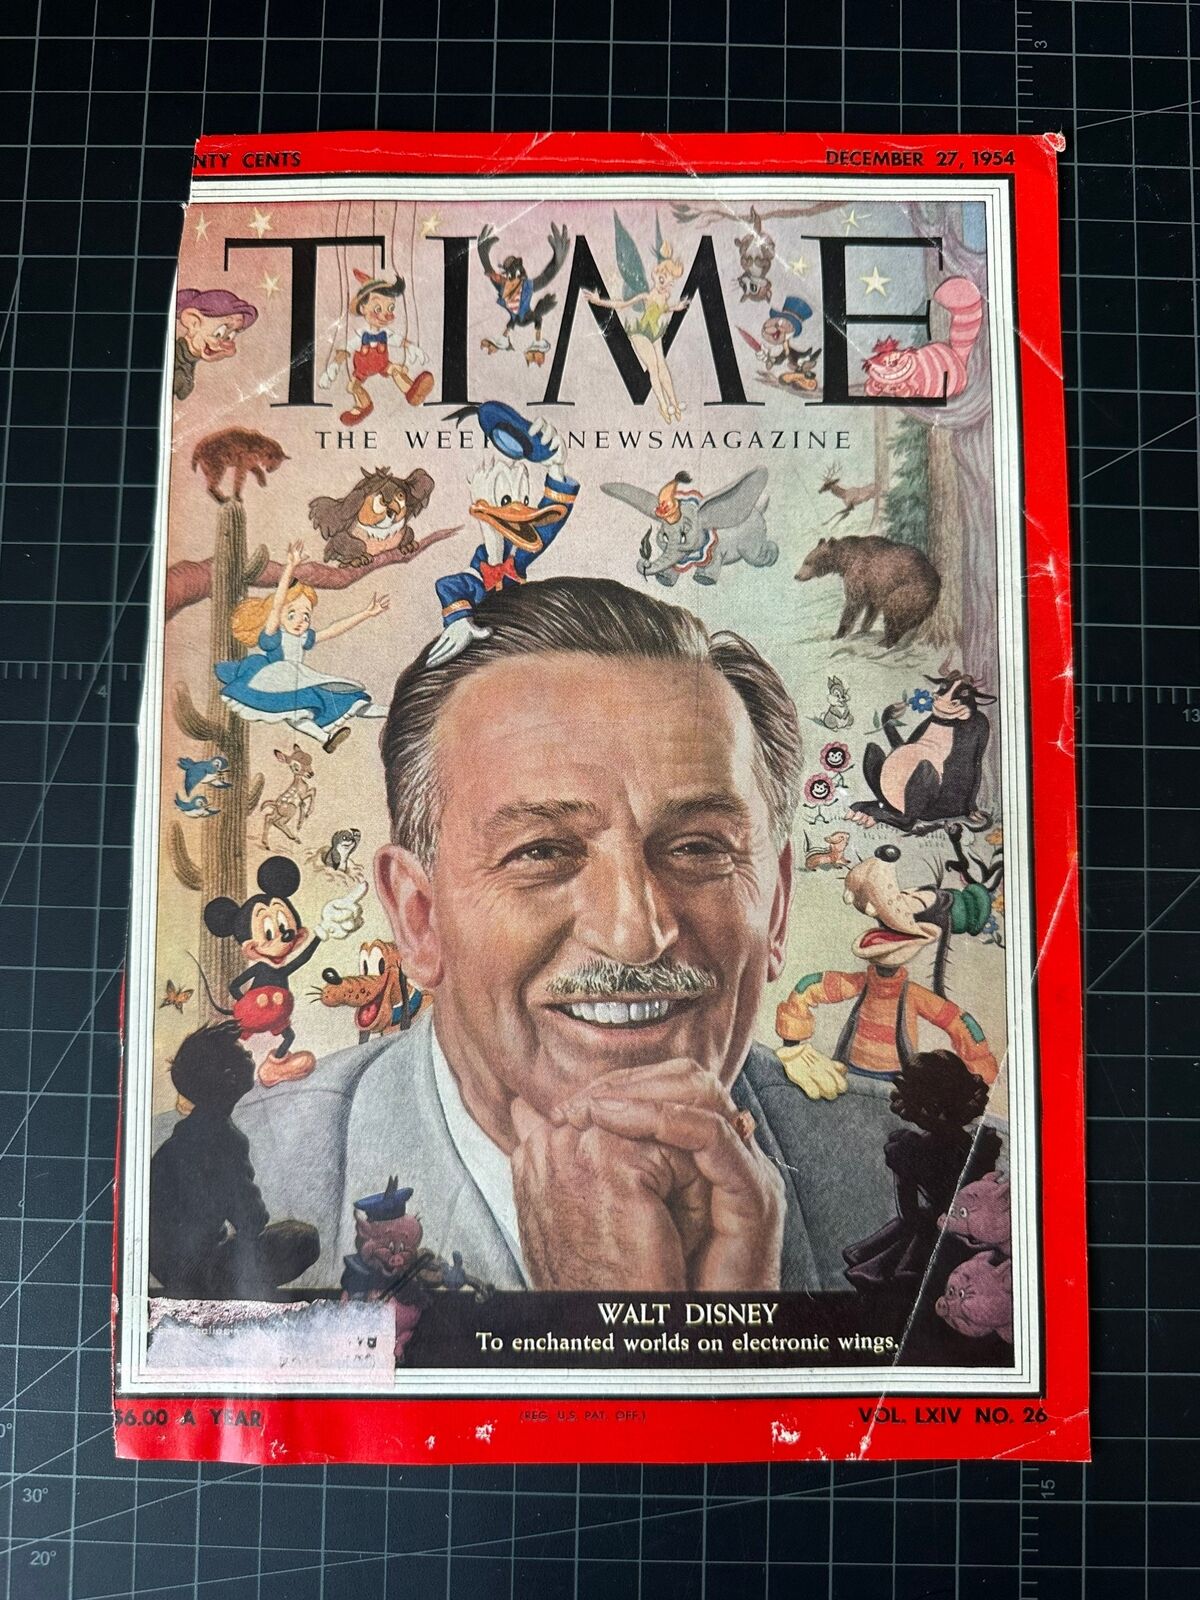 Rare Vintage 1954 Time Magazine Cover - Walt Disney - COVER ONLY